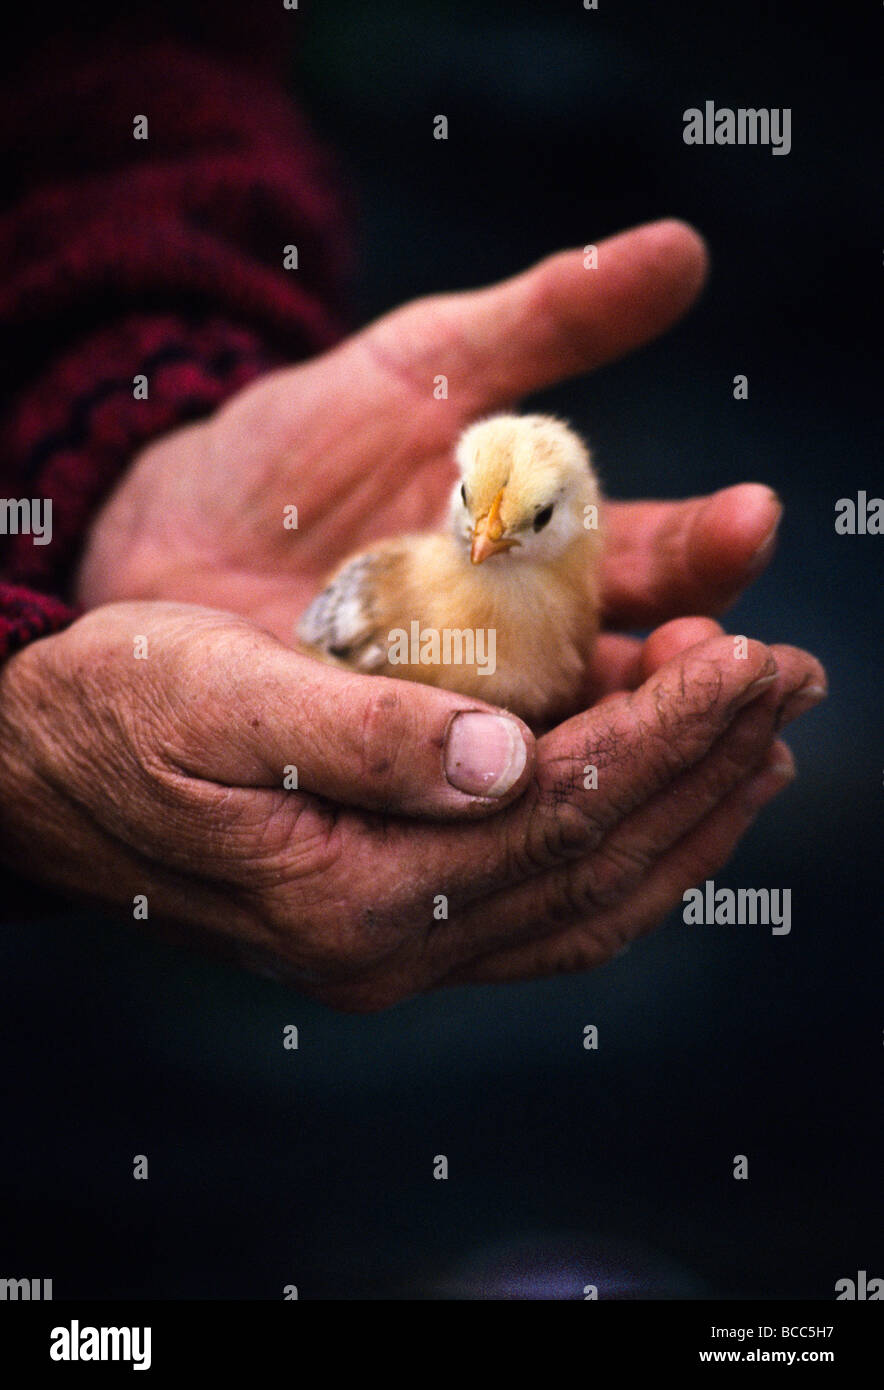 Rough, dirty hands cradling baby chick. Stock Photo